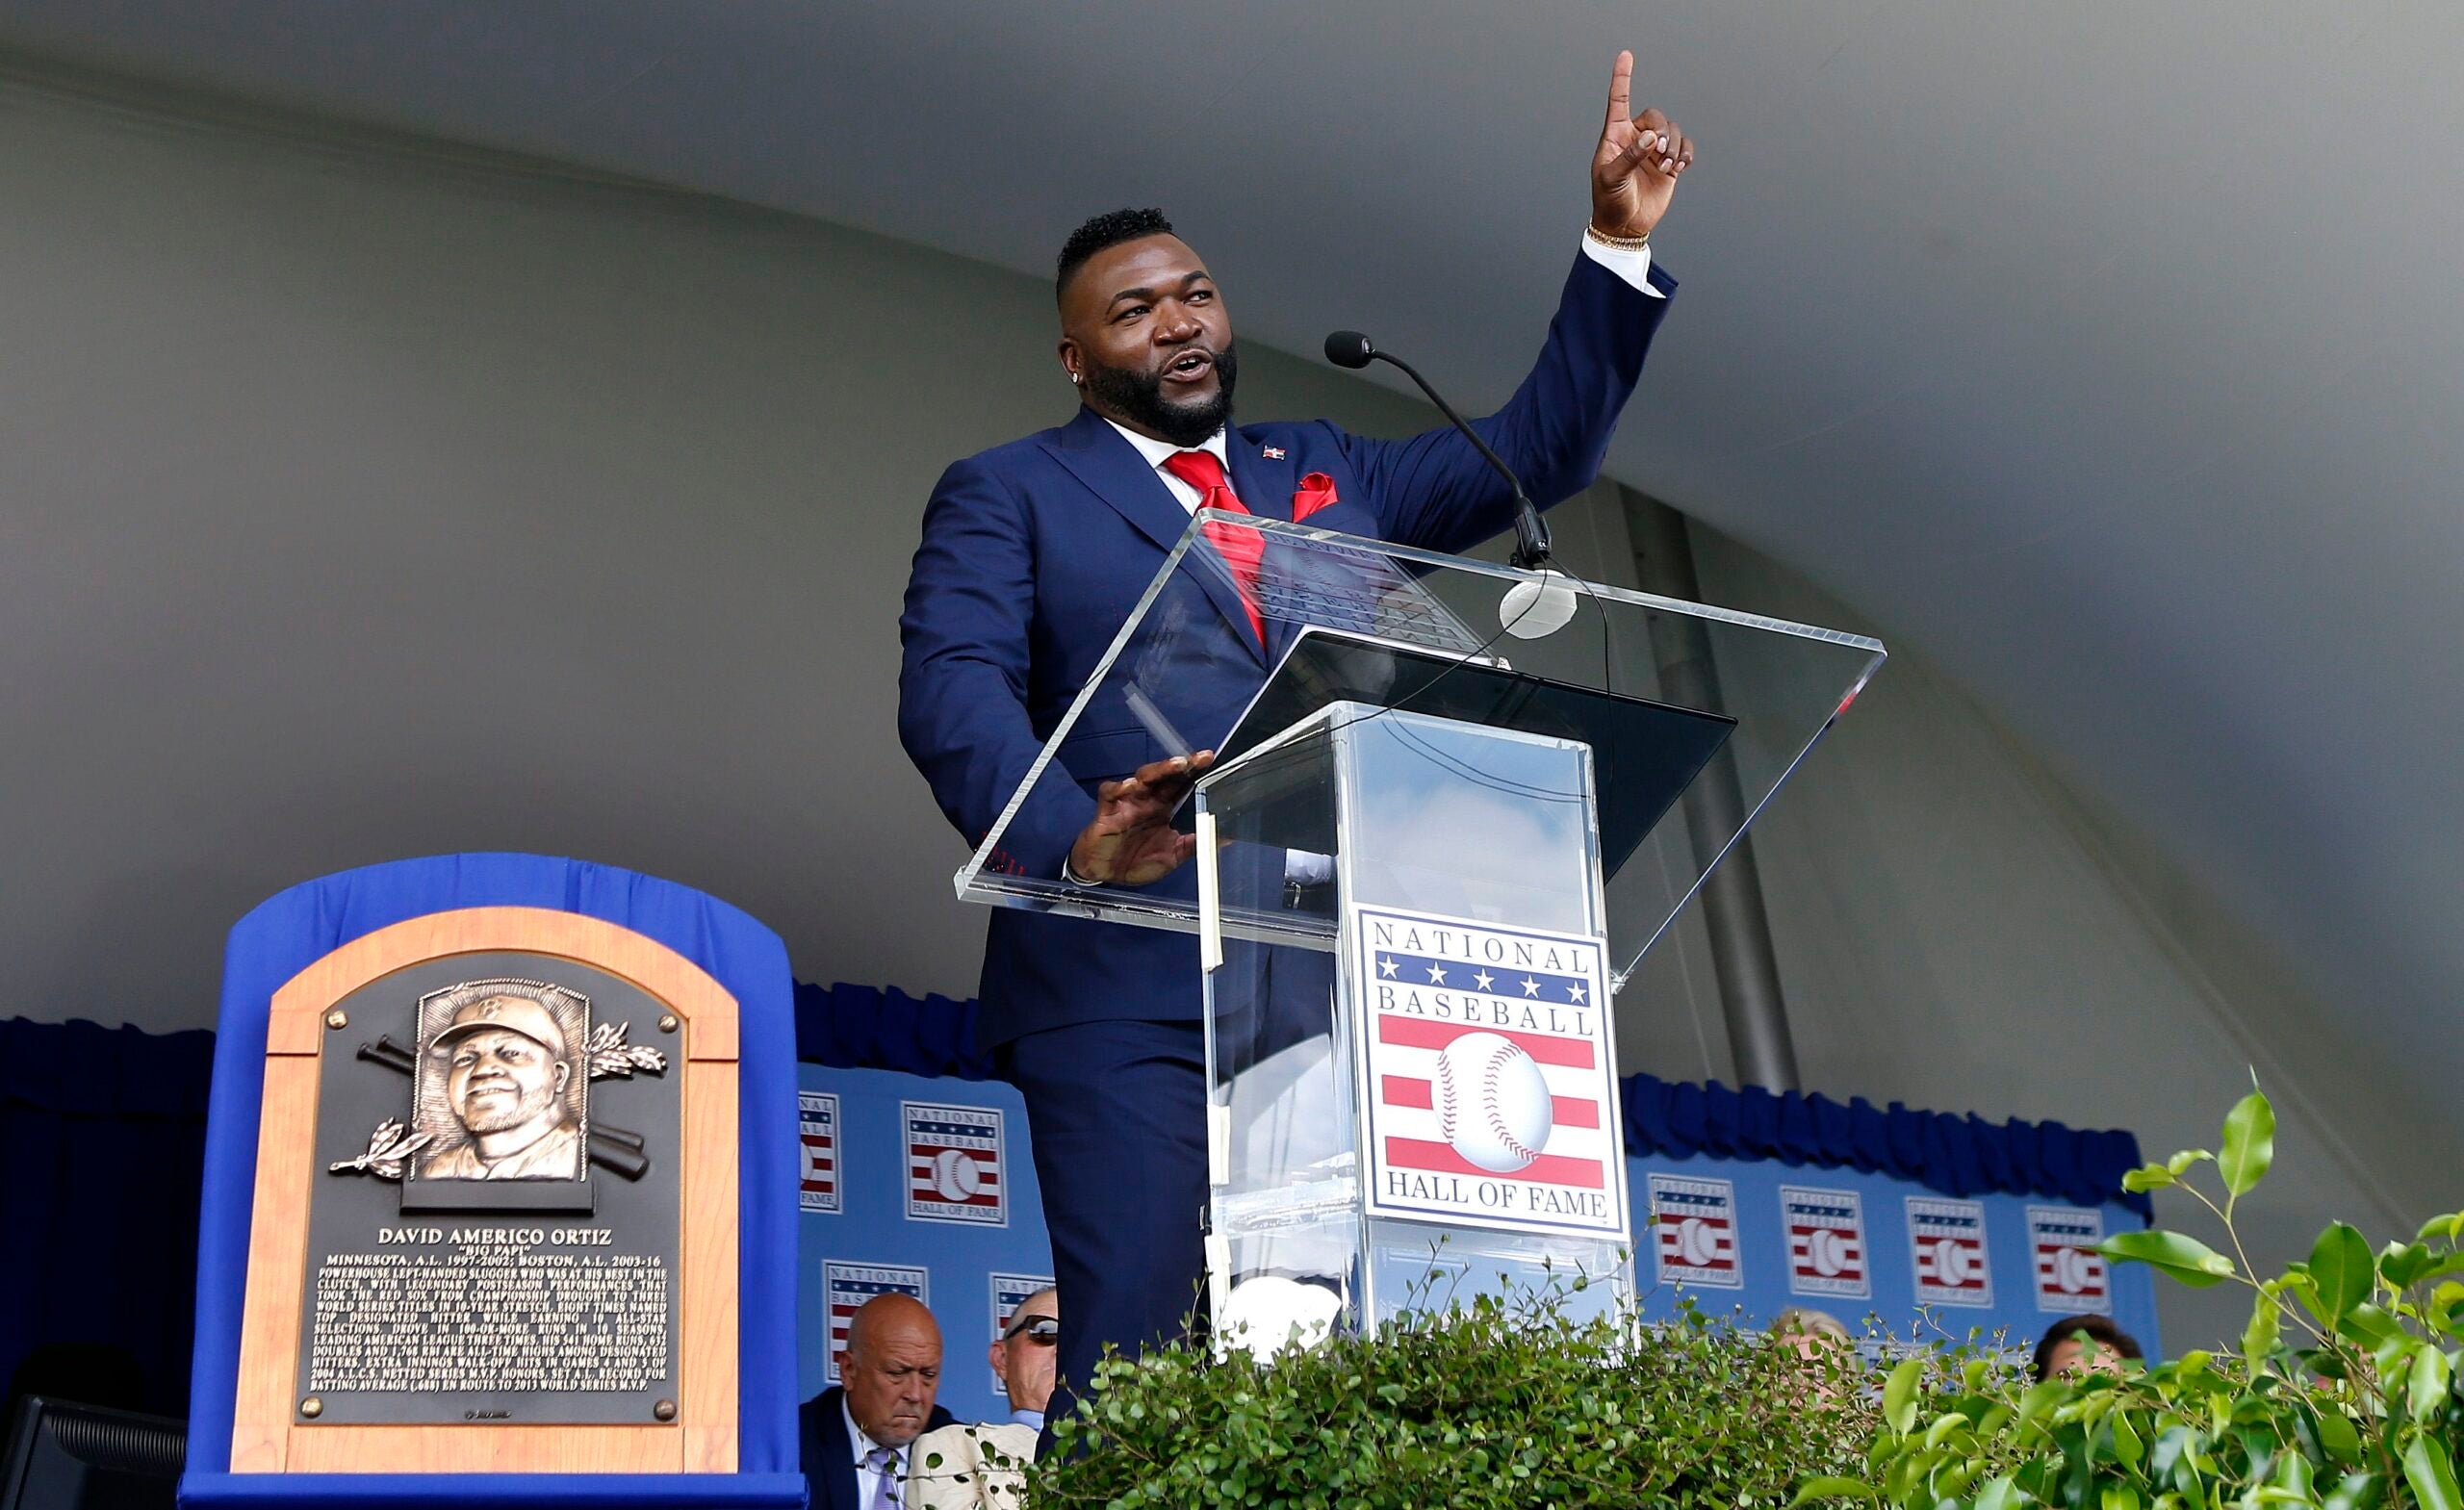 Hall of Fame voting winners and losers: David Ortiz gets in, who